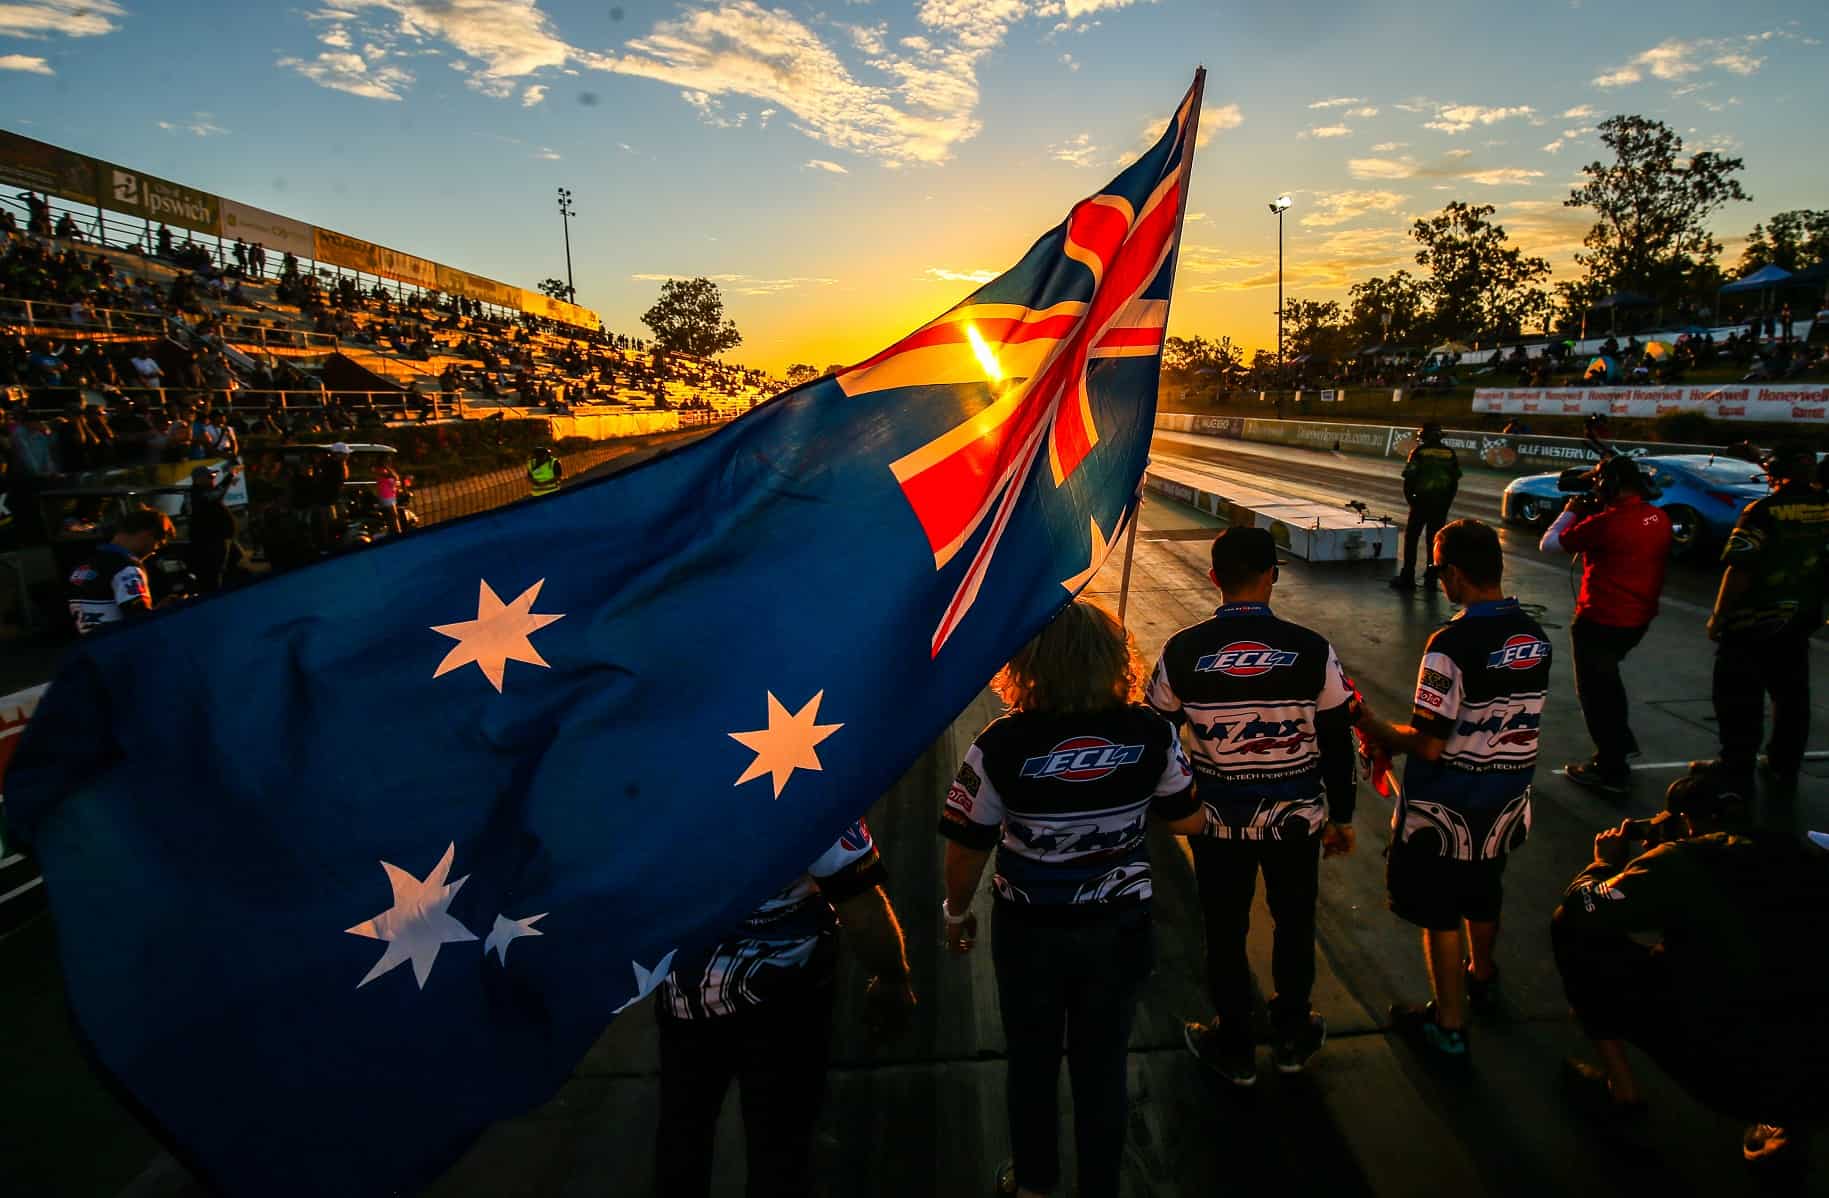 Mazfix is one of the local teams who will be racing jamboree before heading over to USA to take on the Yanks with 5 other Australian Teams